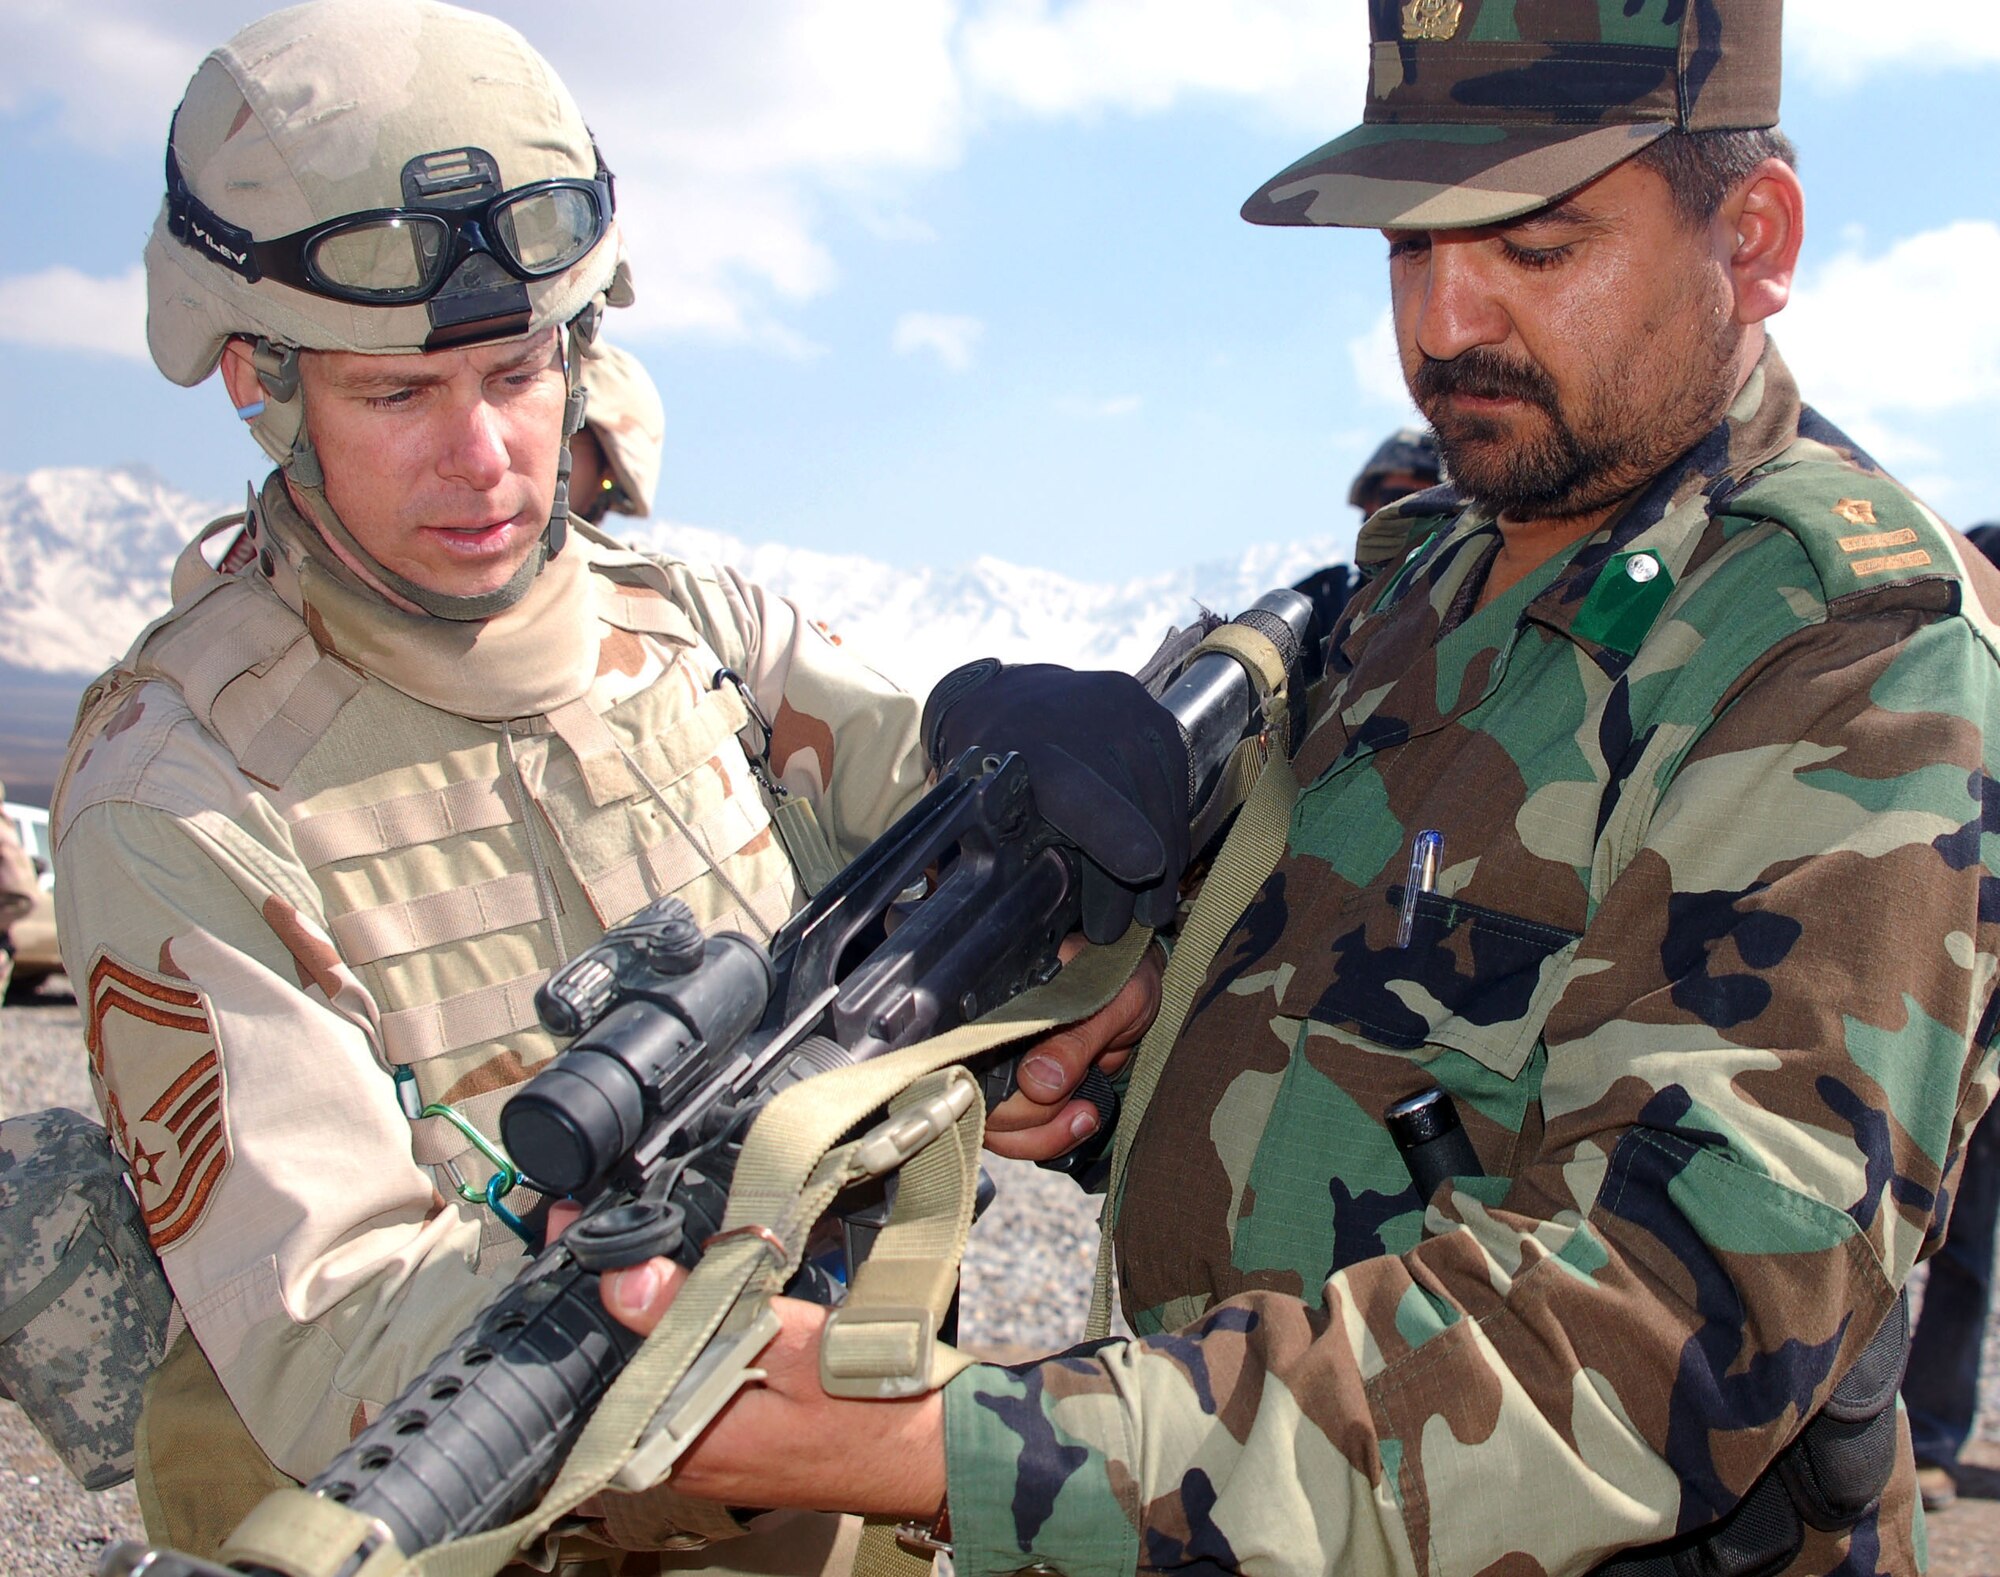 Senior Master Sgt. Robert Spaulding shows Afghan National Army Capt. Abdul Rahman, the mechanics of an M-16 and how to view the target through the optical scope March 14. Sergeant Spaulding is deployed from the 4th Logistics Readiness Squadron at Seymour-Johnson Air Force Base, N.C. (U.S. Air Force photo/Senior Airman Stacia Zachary)